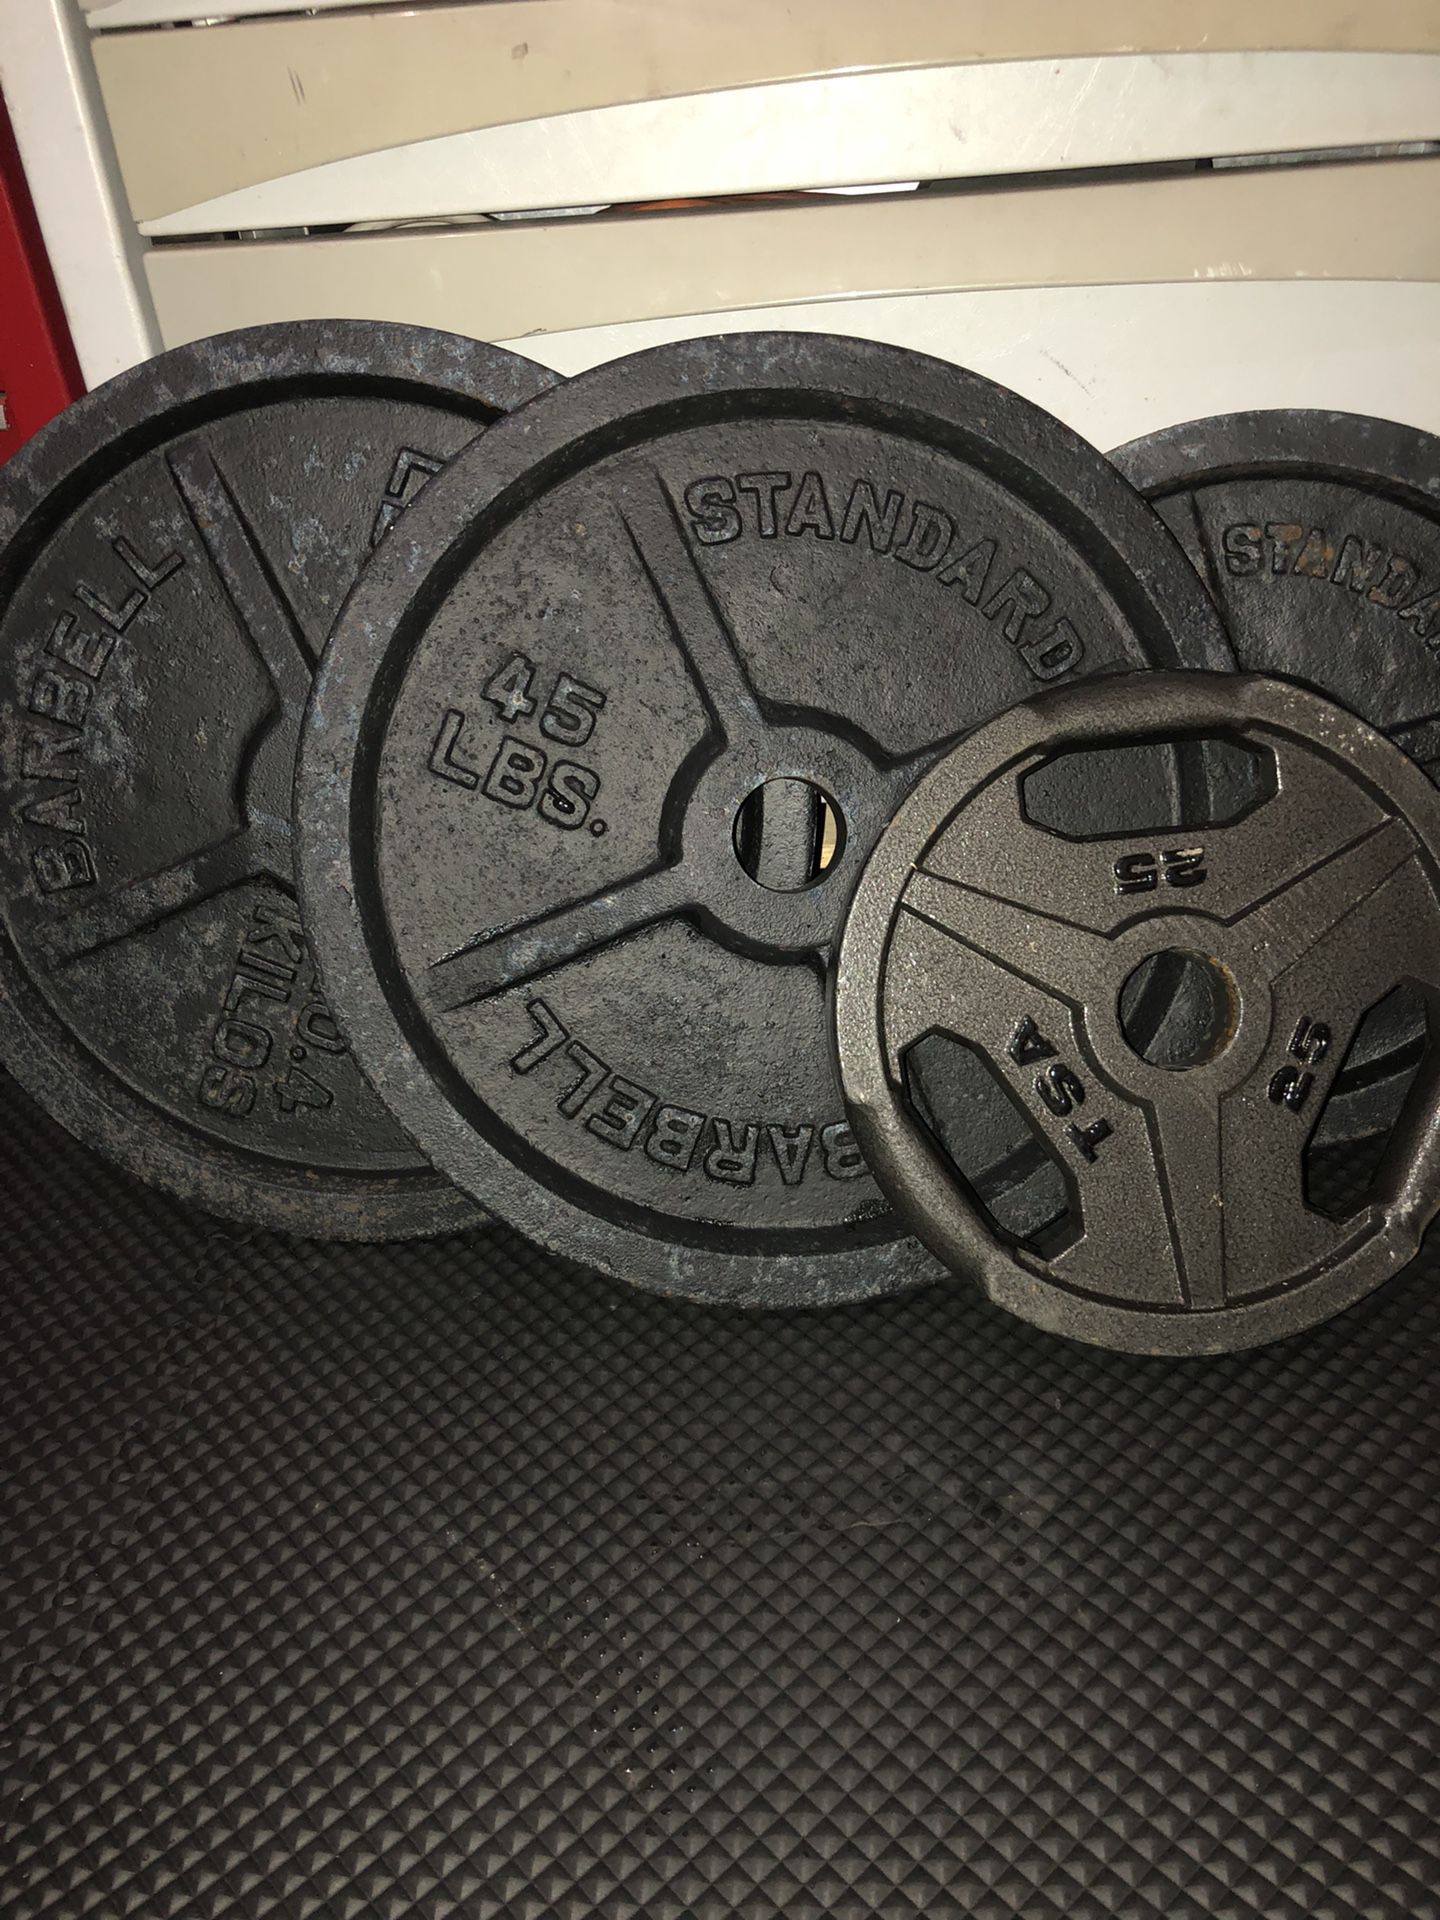 Olympic weights￼